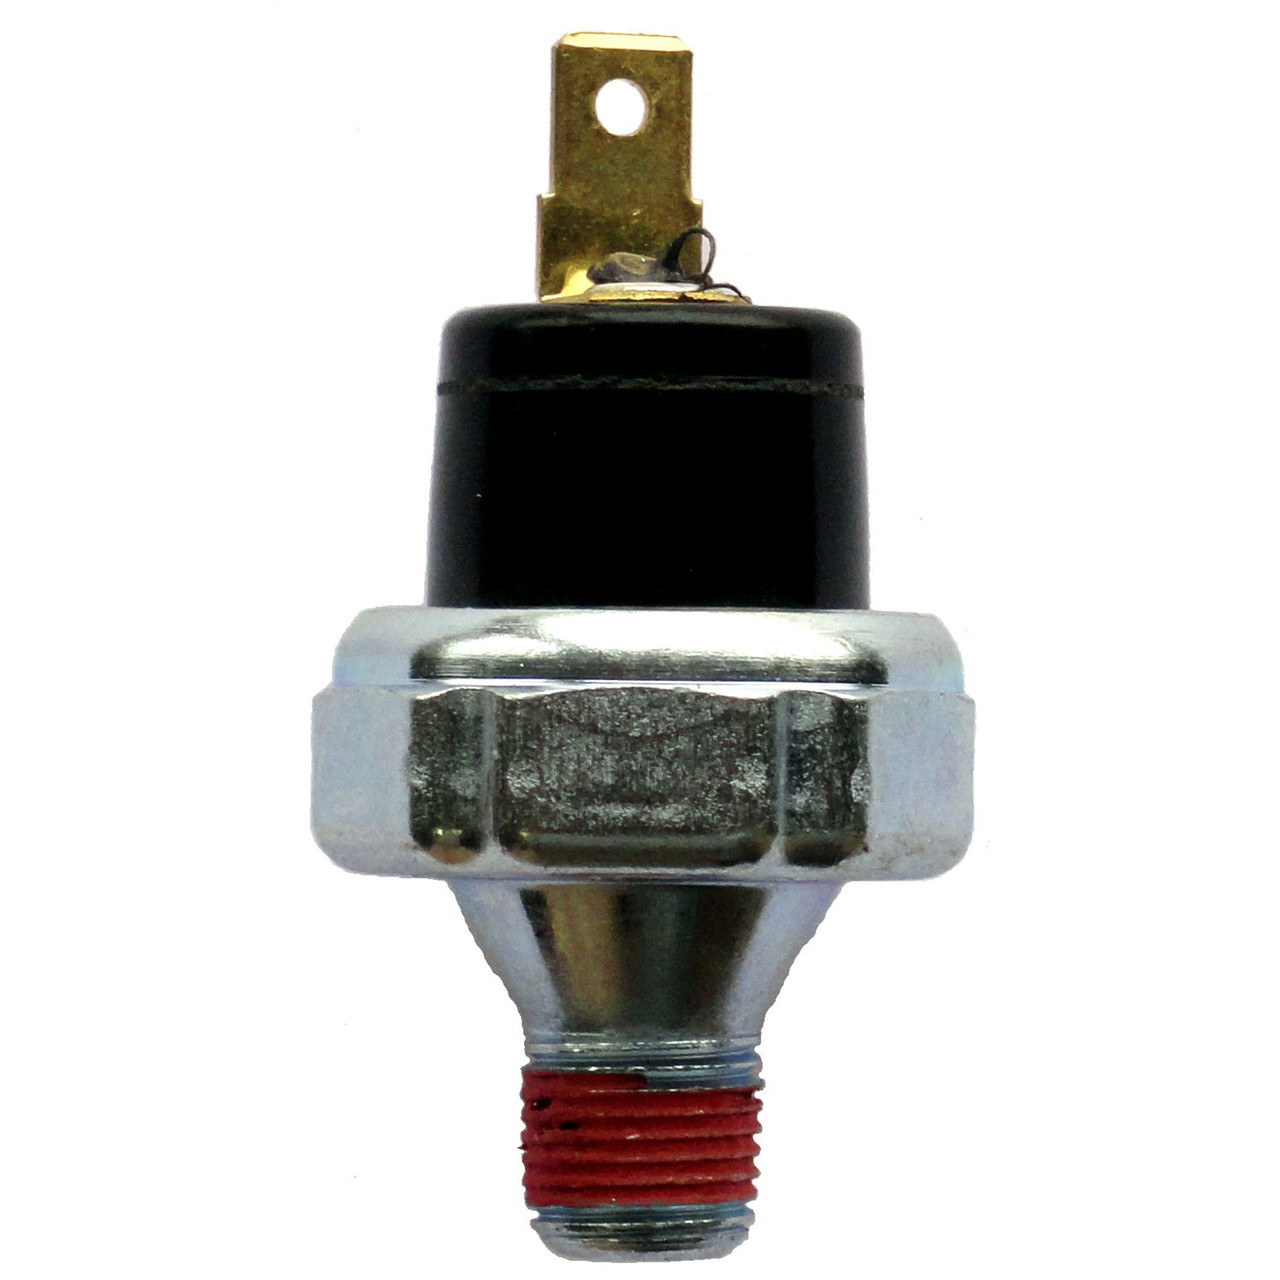 Pressure-operated switch, internally grounded. Has one “quick-connect”, 1/4″ spade terminal. Switch is normally closed, opening on a decrease in pressure, at 2-6 PSI.
Operating range: 0-250PSI, withstands 160PSI continuous without leaking.
Operating temperature: -40°F to 250°F (-40°C to 121°C).
Current rated for 1A at 12VDC.